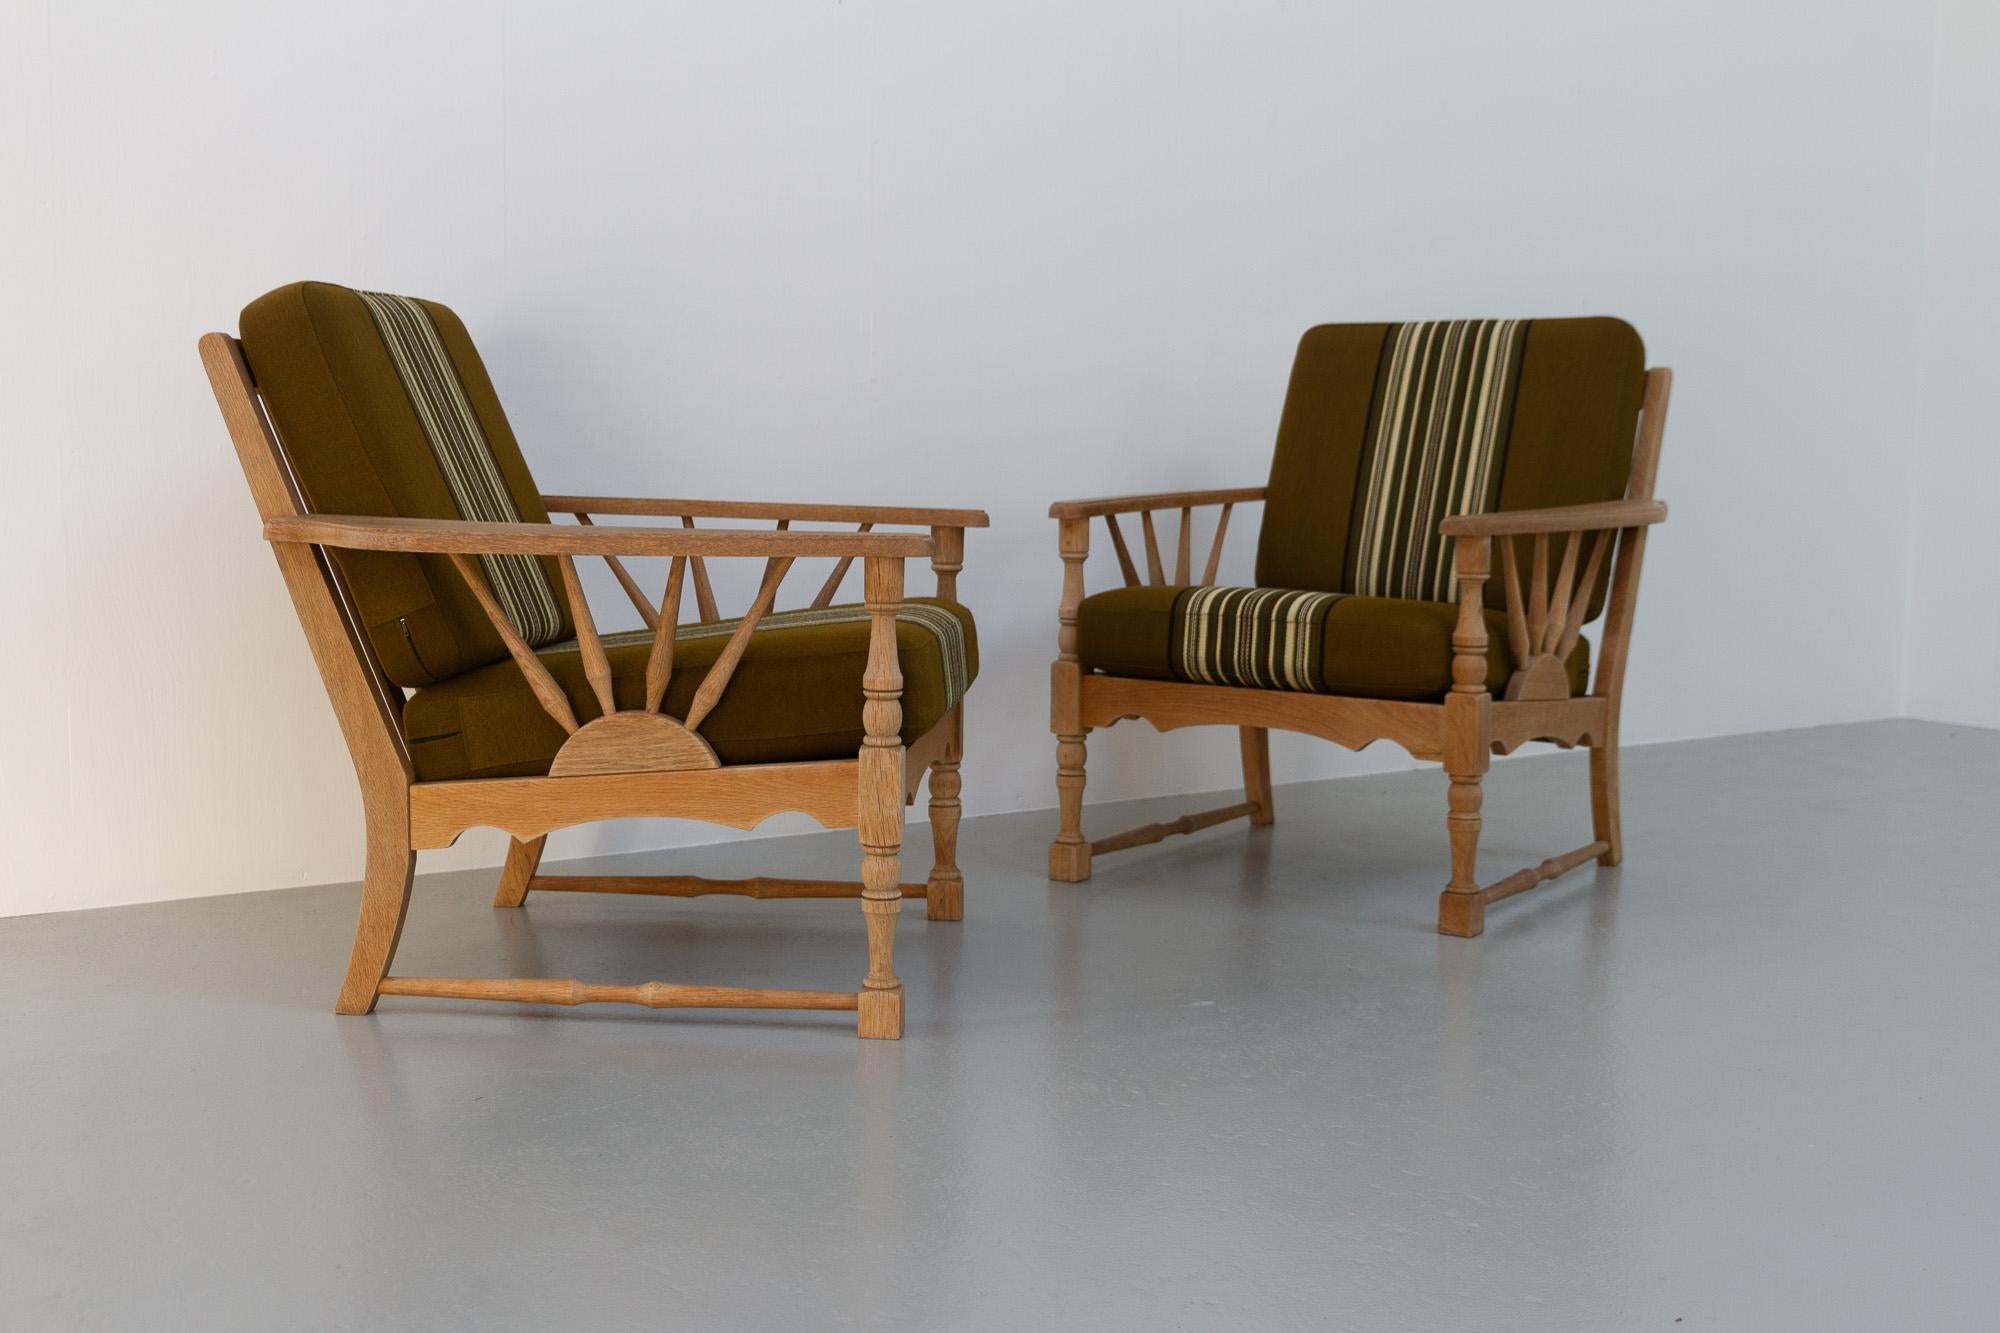 Vintage Danish Lounge Chairs in Oak, 1960s. Set of 2.
Pair of Danish Mid-Century Modern easy chairs in solid oak with original cushions in wool upholstery.
Made in the 1960s by Danish cabinetmaker. Very likely designed by Henning Kjærnulf, Denmark